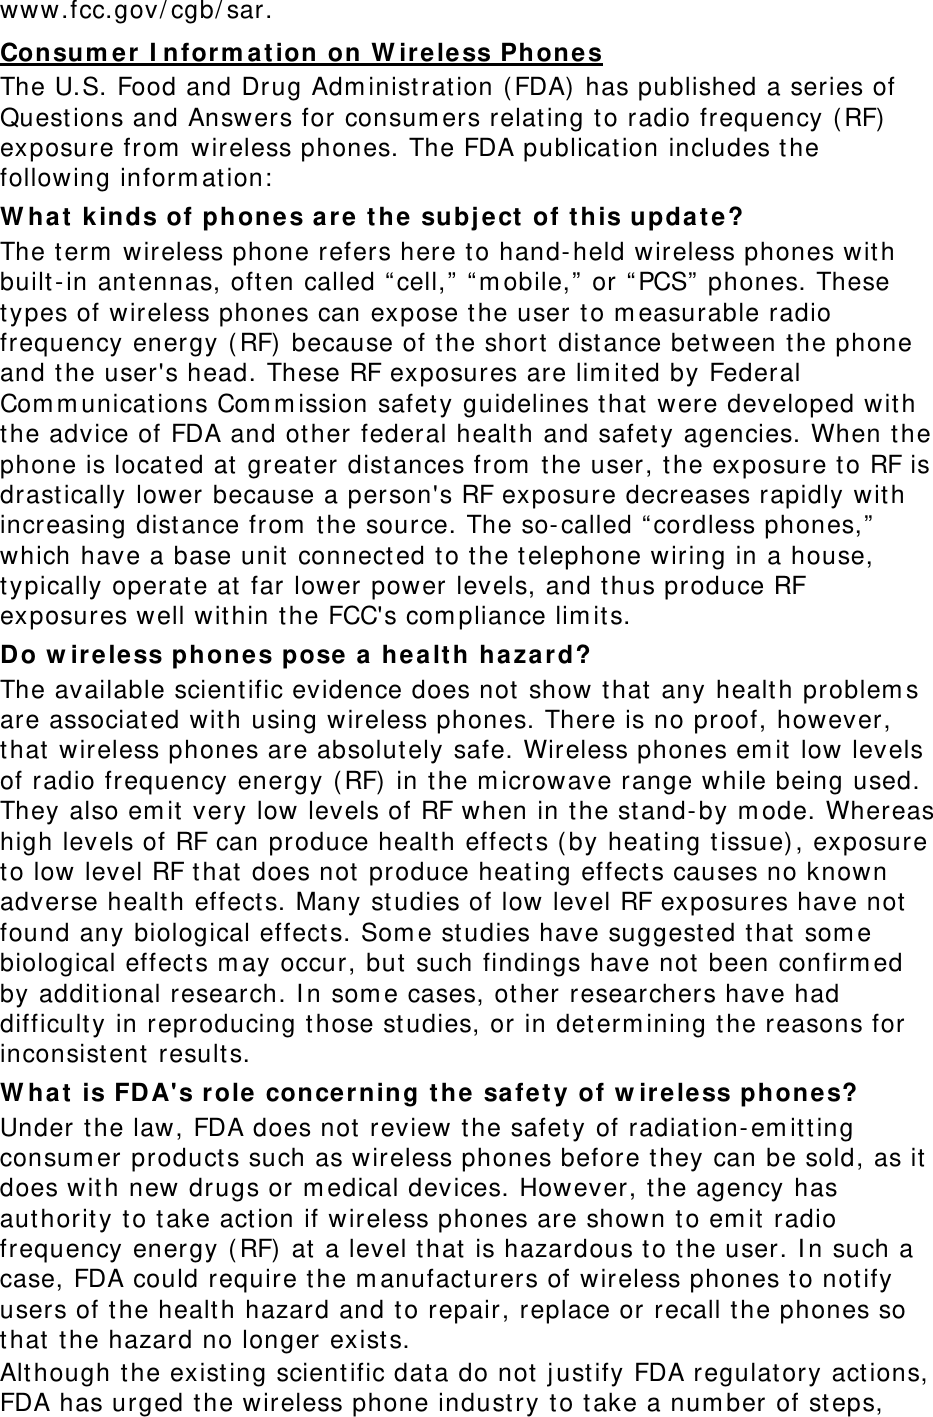 www.fcc.gov/ cgb/ sar. Consum er I nfor m at ion on W ir ele ss Phone s The U.S. Food and Drug Adm inistrat ion (FDA)  has published a series of Quest ions and Answers for consum ers relating to radio frequency (RF) exposure from  wireless phones. The FDA publicat ion includes the following inform ation:  W ha t  k inds of phones are  t he  subj ect  of t his update? The t erm  wireless phone refers here to hand- held wireless phones wit h built - in antennas, often called “ cell,”  “ m obile,”  or “ PCS”  phones. These types of wireless phones can expose t he user to m easurable radio frequency energy ( RF) because of t he short dist ance bet ween the phone and t he user&apos;s head. These RF exposures are lim ited by Federal Com m unicat ions Com m ission safet y guidelines t hat  were developed wit h the advice of FDA and ot her federal healt h and safet y agencies. When t he phone is locat ed at  great er dist ances from  t he user, t he exposure t o RF is drastically lower because a person&apos;s RF exposure decreases rapidly wit h increasing dist ance from  t he source. The so- called “ cordless phones,”  which have a base unit  connect ed t o t he telephone wiring in a house, typically operat e at  far lower power levels, and t hus produce RF exposures well wit hin t he FCC&apos;s com pliance lim it s. Do w irele ss phones pose  a h ea lt h haza r d? The available scientific evidence does not  show t hat  any healt h problem s are associat ed wit h using wireless phones. There is no proof, however, that  wireless phones are absolut ely safe. Wireless phones em it  low levels of radio frequency energy ( RF)  in t he m icrowave range while being used. They also em it  very low levels of RF when in the st and- by m ode. Whereas high levels of RF can produce health effect s ( by heat ing tissue) , exposure to low level RF t hat  does not produce heating effect s causes no known adverse healt h effects. Many st udies of low level RF exposures have not found any biological effect s. Som e st udies have suggest ed t hat  som e biological effects m ay occur, but  such findings have not  been confirm ed by addit ional research. I n som e cases, other researchers have had difficult y in reproducing t hose st udies, or in det erm ining the reasons for inconsist ent  results. W ha t  is FDA&apos;s role concerning t he sa fet y of w ireless phones? Under t he law, FDA does not review t he safet y of radiation-em itting consum er product s such as wireless phones before they can be sold, as it  does wit h new drugs or m edical devices. However, t he agency has aut horit y t o take act ion if wireless phones are shown to em it  radio frequency energy ( RF) at  a level t hat  is hazardous to t he user. I n such a case, FDA could require the m anufact urers of w ireless phones t o not ify users of the health hazard and to repair, replace or recall t he phones so that  t he hazard no longer exists. Although t he exist ing scient ific dat a do not j ust ify FDA regulat ory act ions, FDA has urged the wireless phone indust ry t o t ake a num ber of steps, 